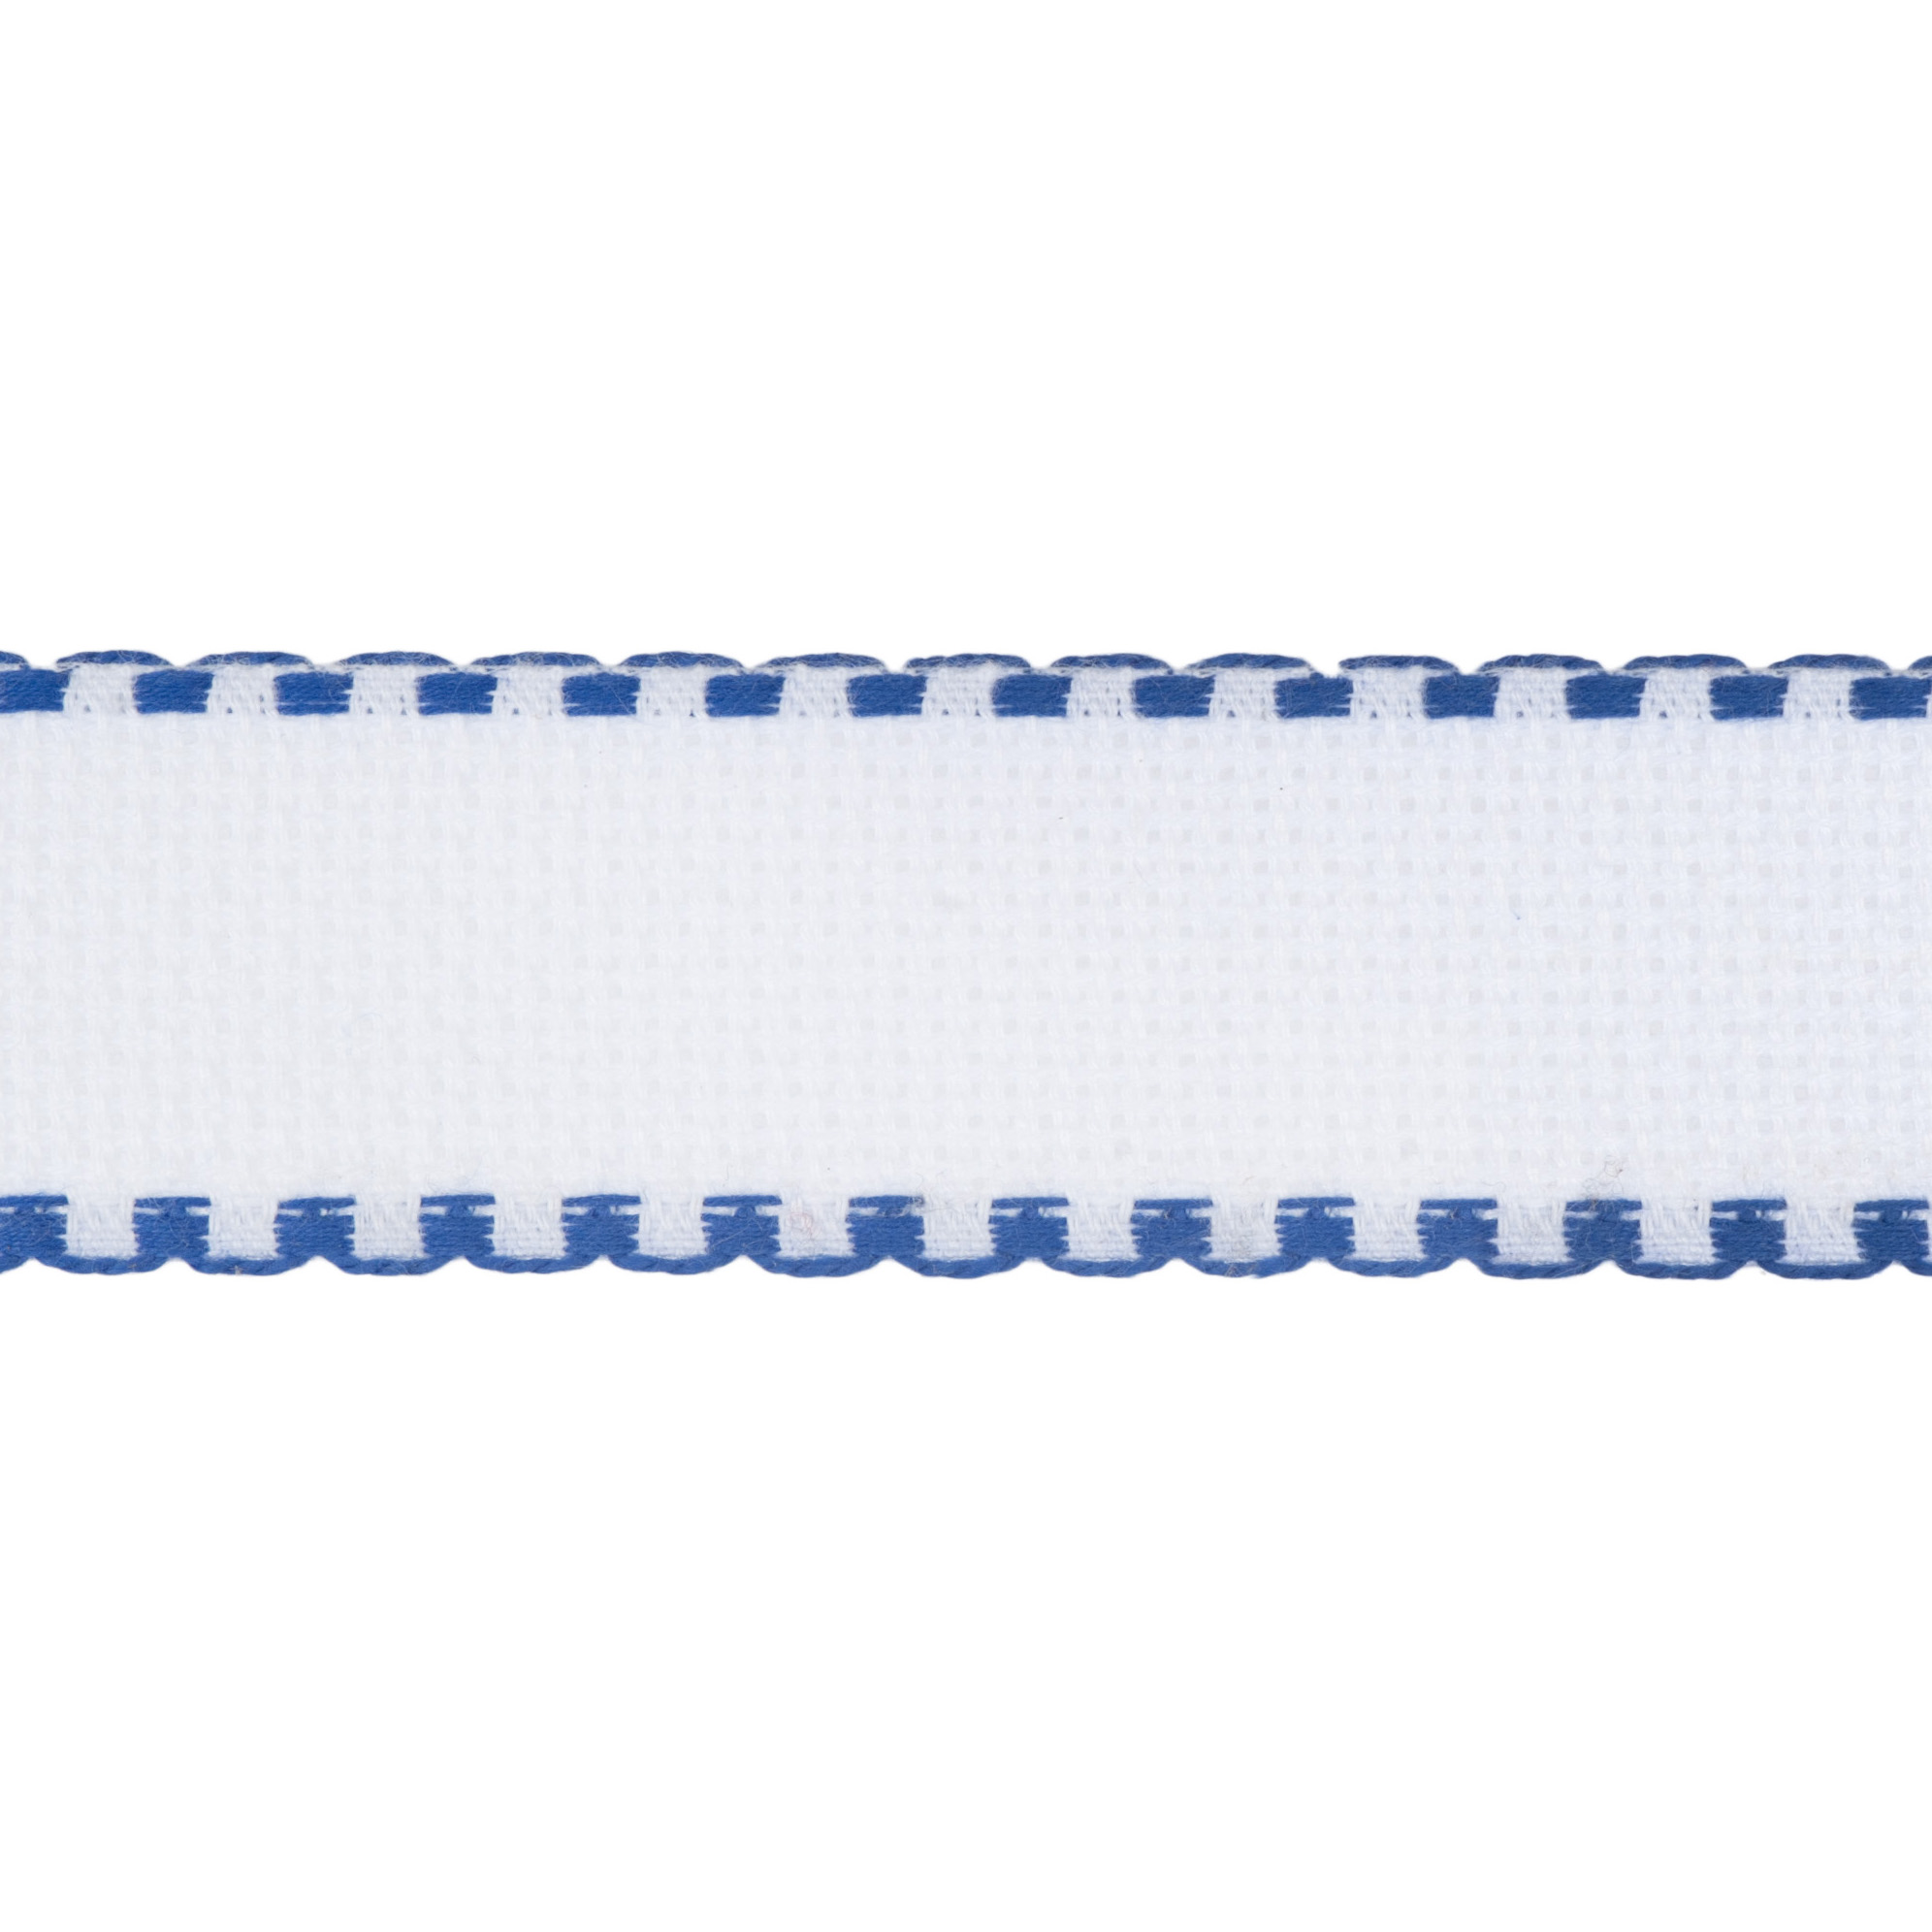 Picture of Needlecraft Fabric: Aida Band: 16 Count: 8m x 30mm: White/Royal Blue Edging